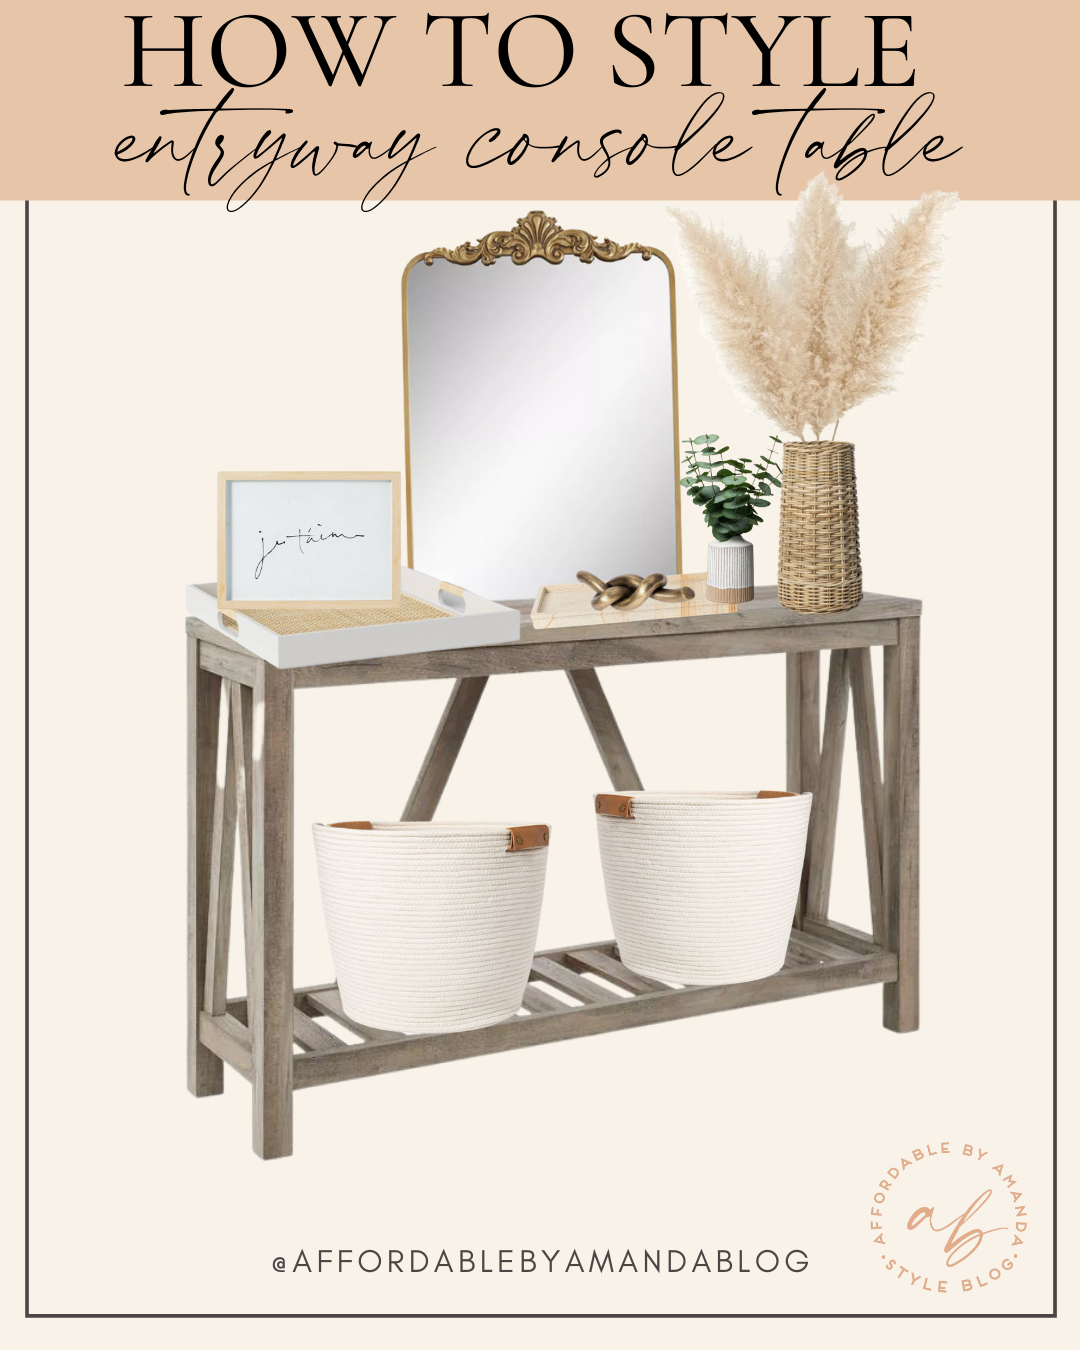 How to Style an Entryway Console Table - Affordable by Amanda